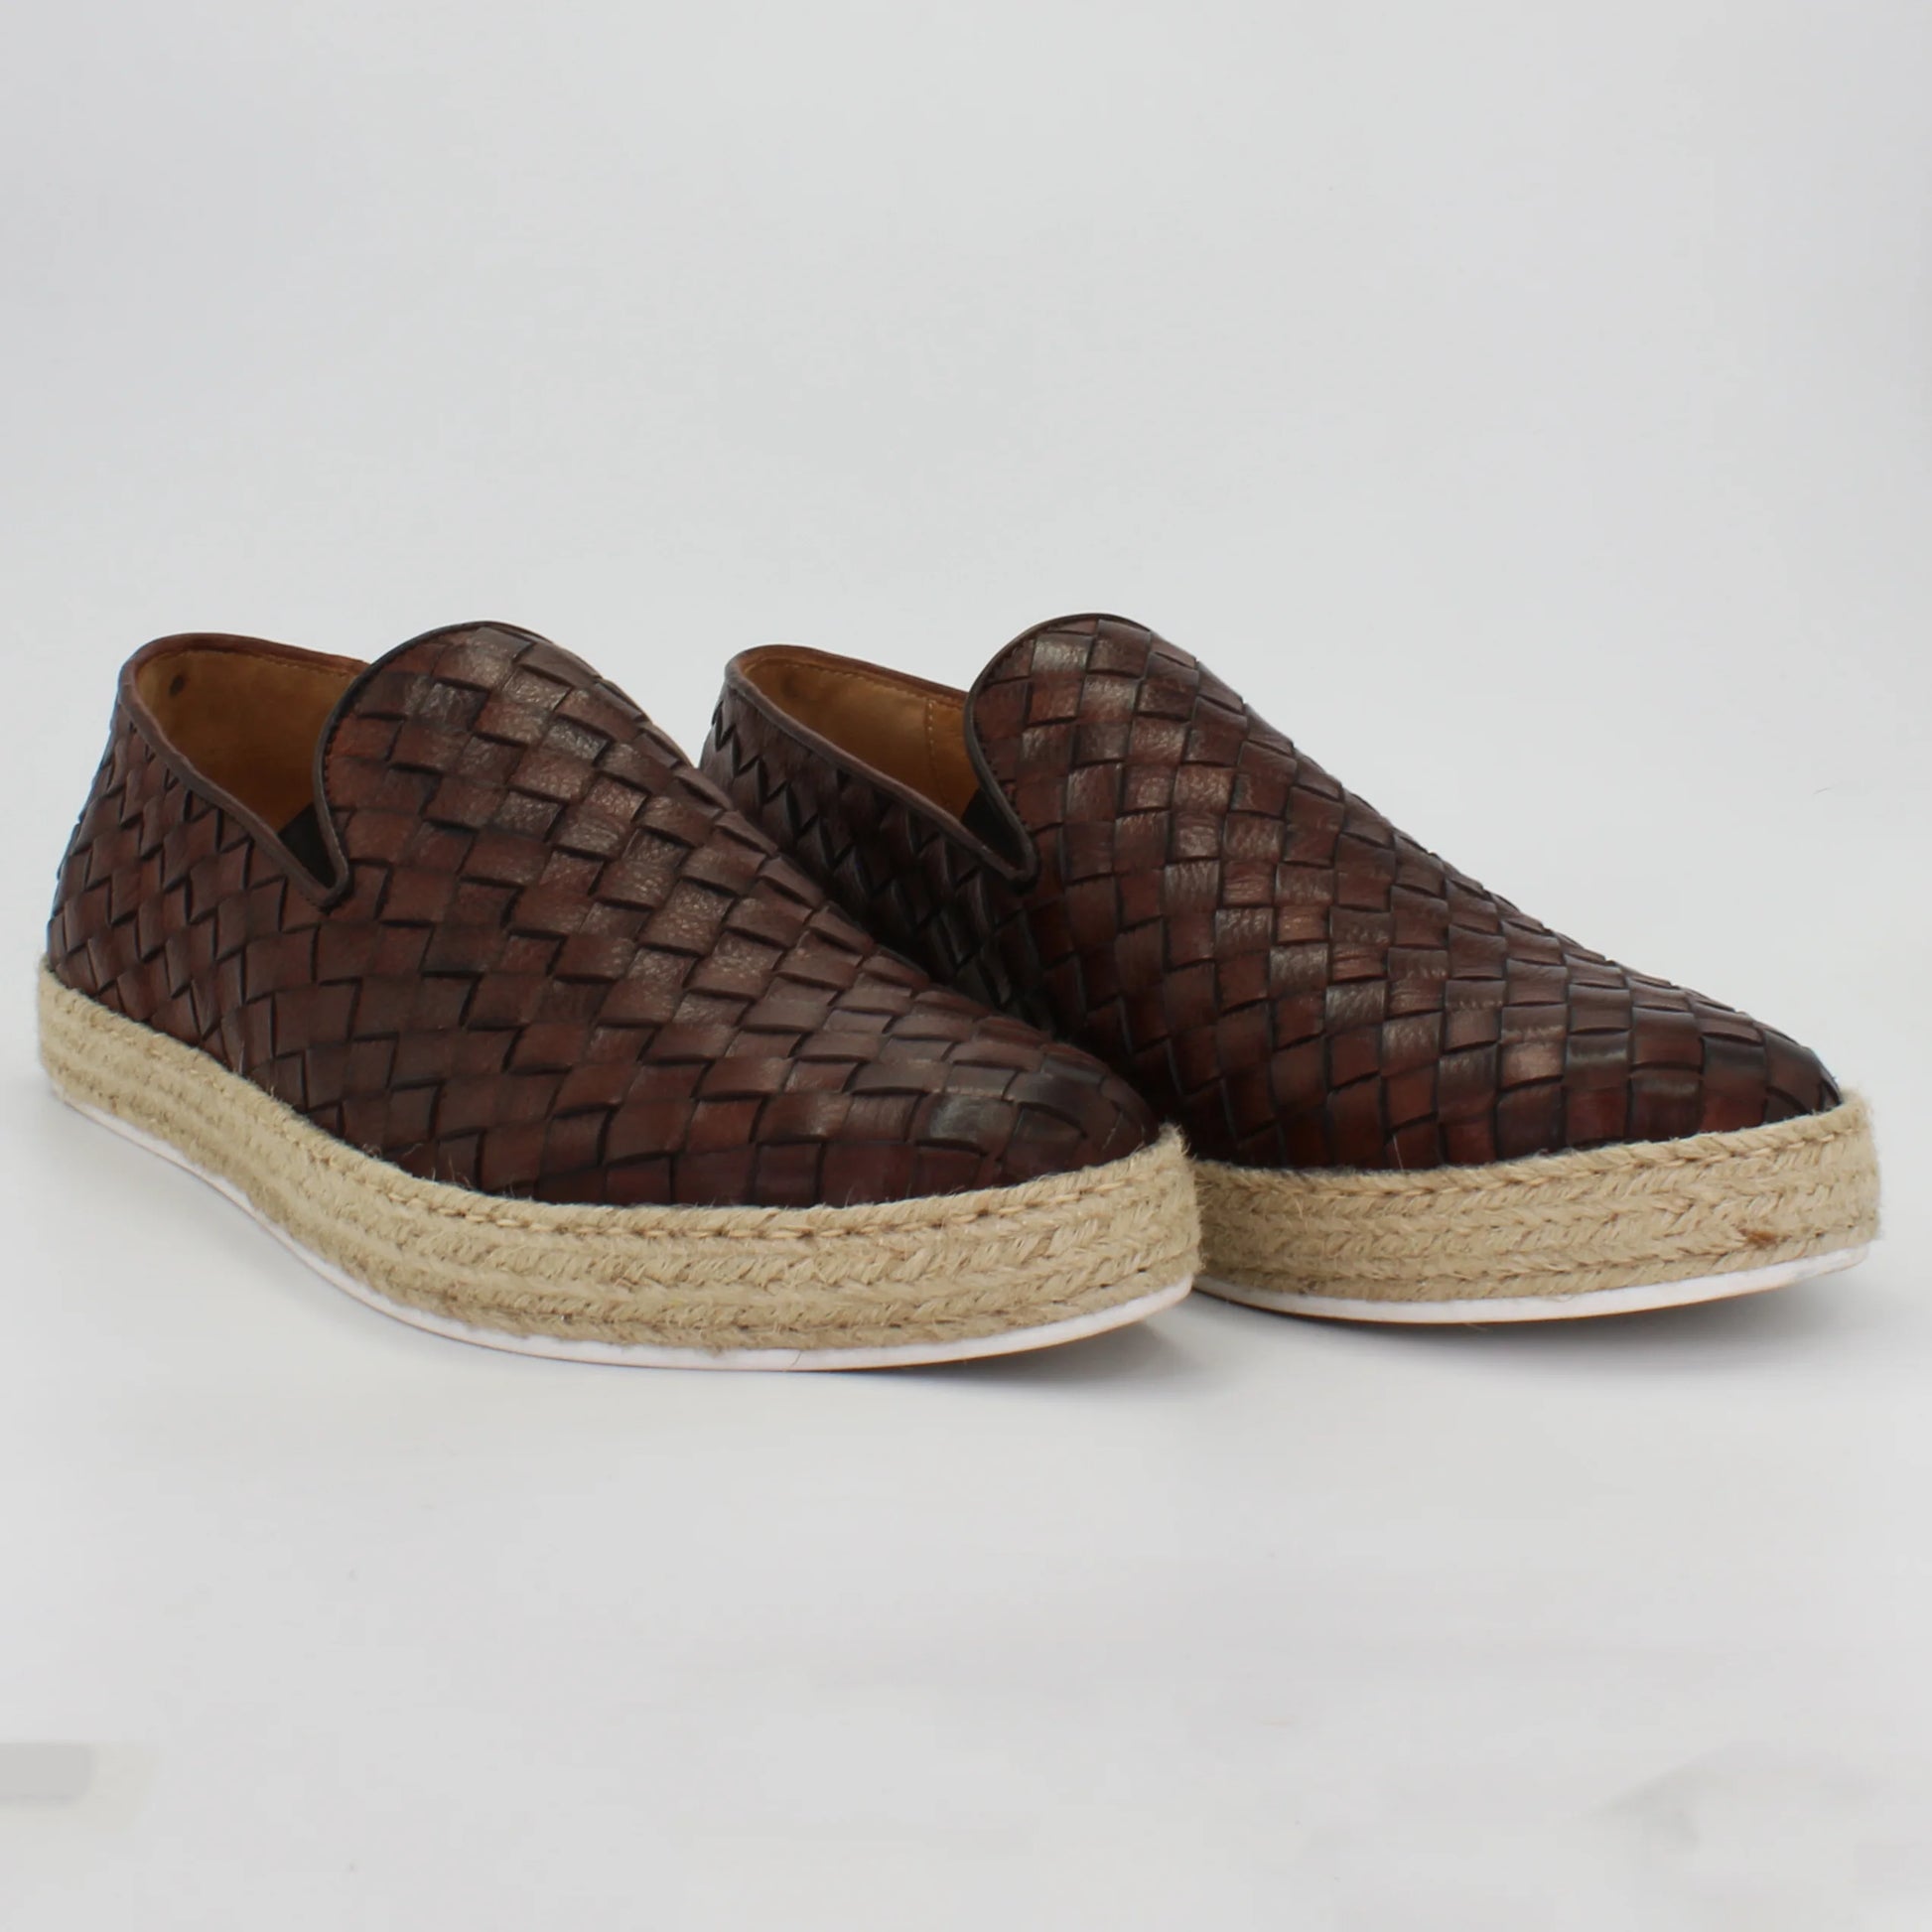 Shop Handmade Italian Leather espadrille (BRU11341) or browse our range of hand-made Italian shoes for men in leather or suede in-store at Aliverti Cape Town, or shop online. We deliver in South Africa & offer multiple payment plans as well as accept multiple safe & secure payment methods.